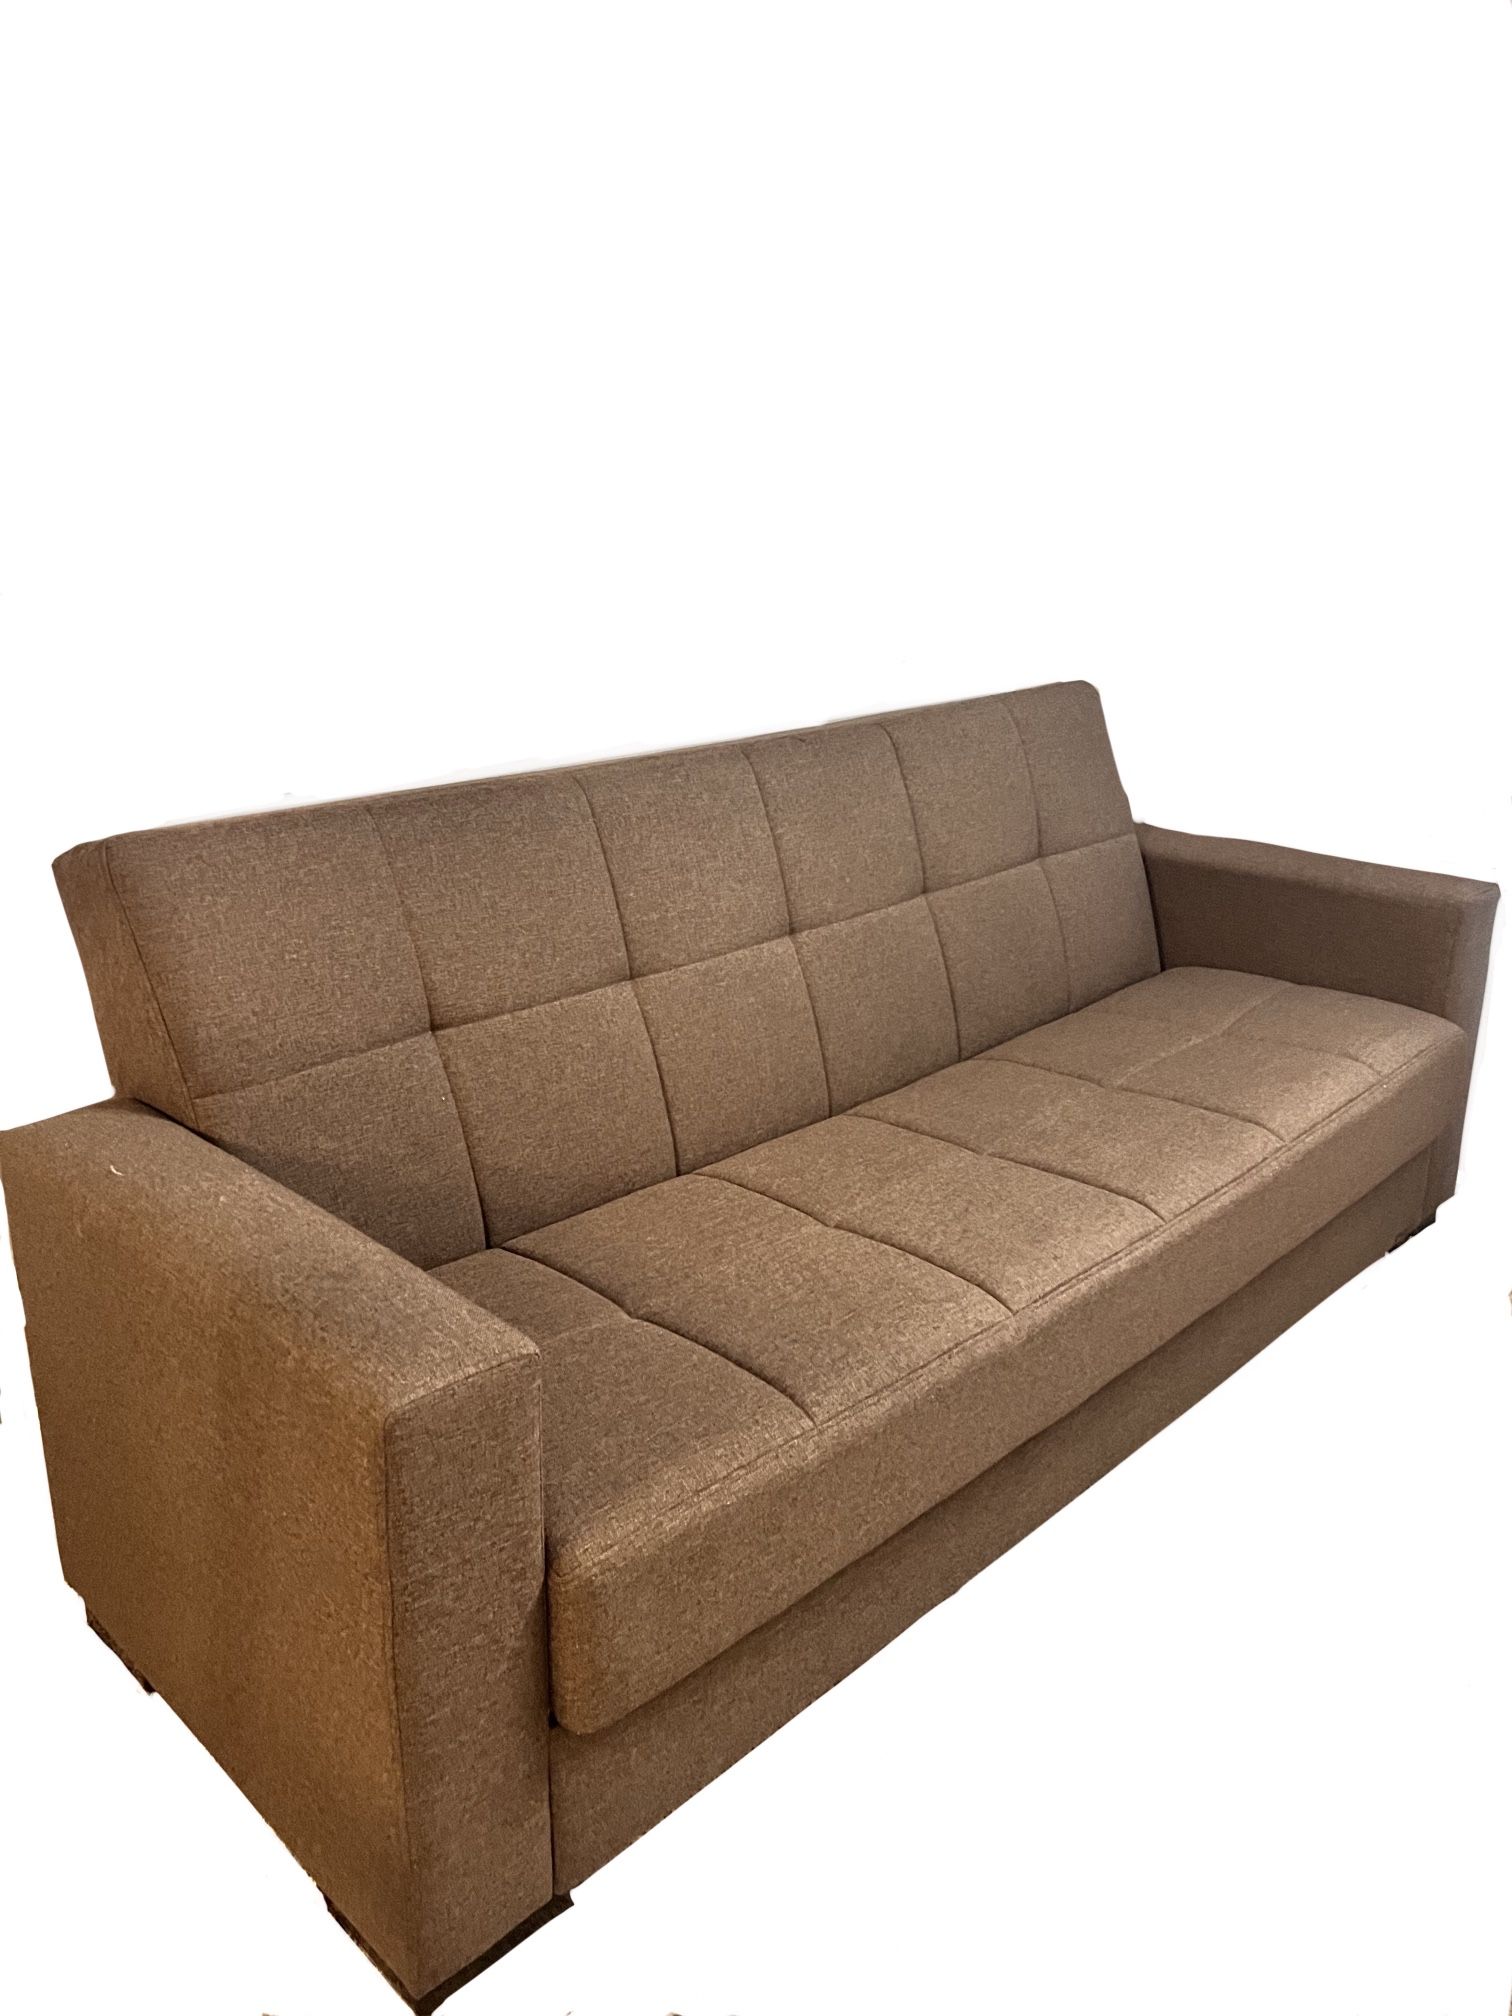 Sofa bed with storage space under